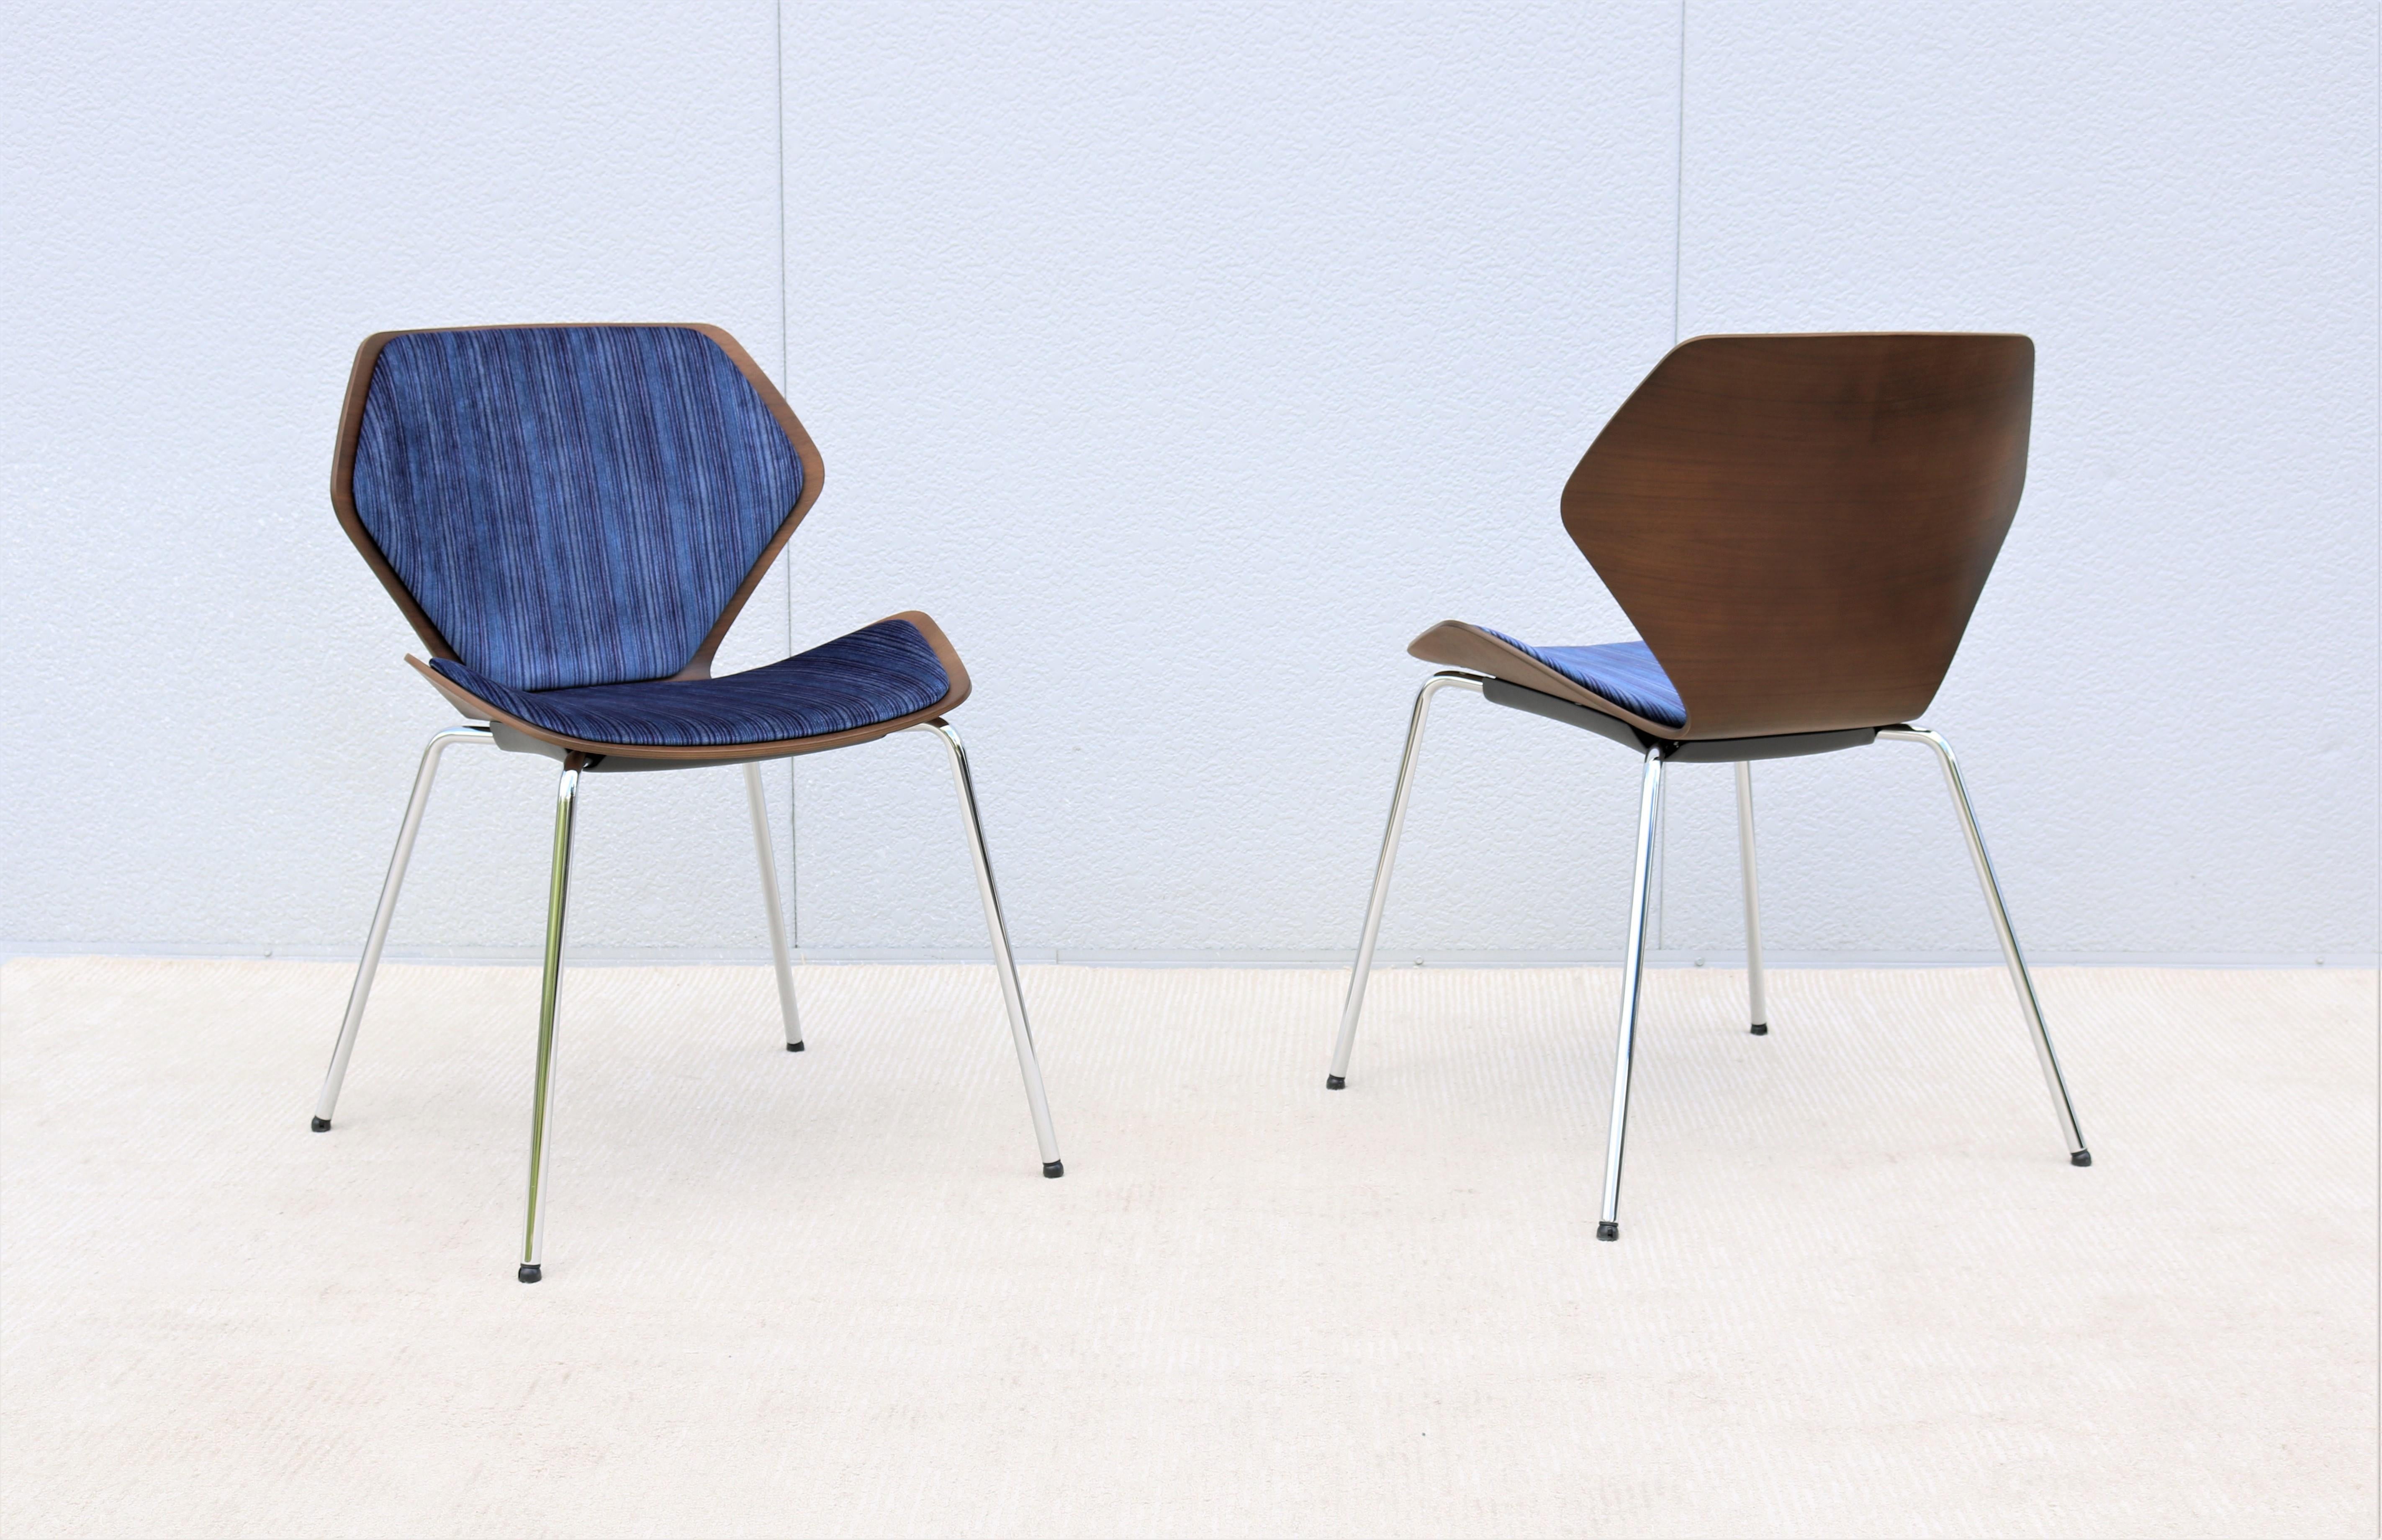 The Ginkgo chair is an elegant yet durable bent plywood chair with an organic aesthetic.
The design features smooth curves and thin graceful lines creating a strong silhouette.
Great comfortable chairs for your home or office use, can be used as